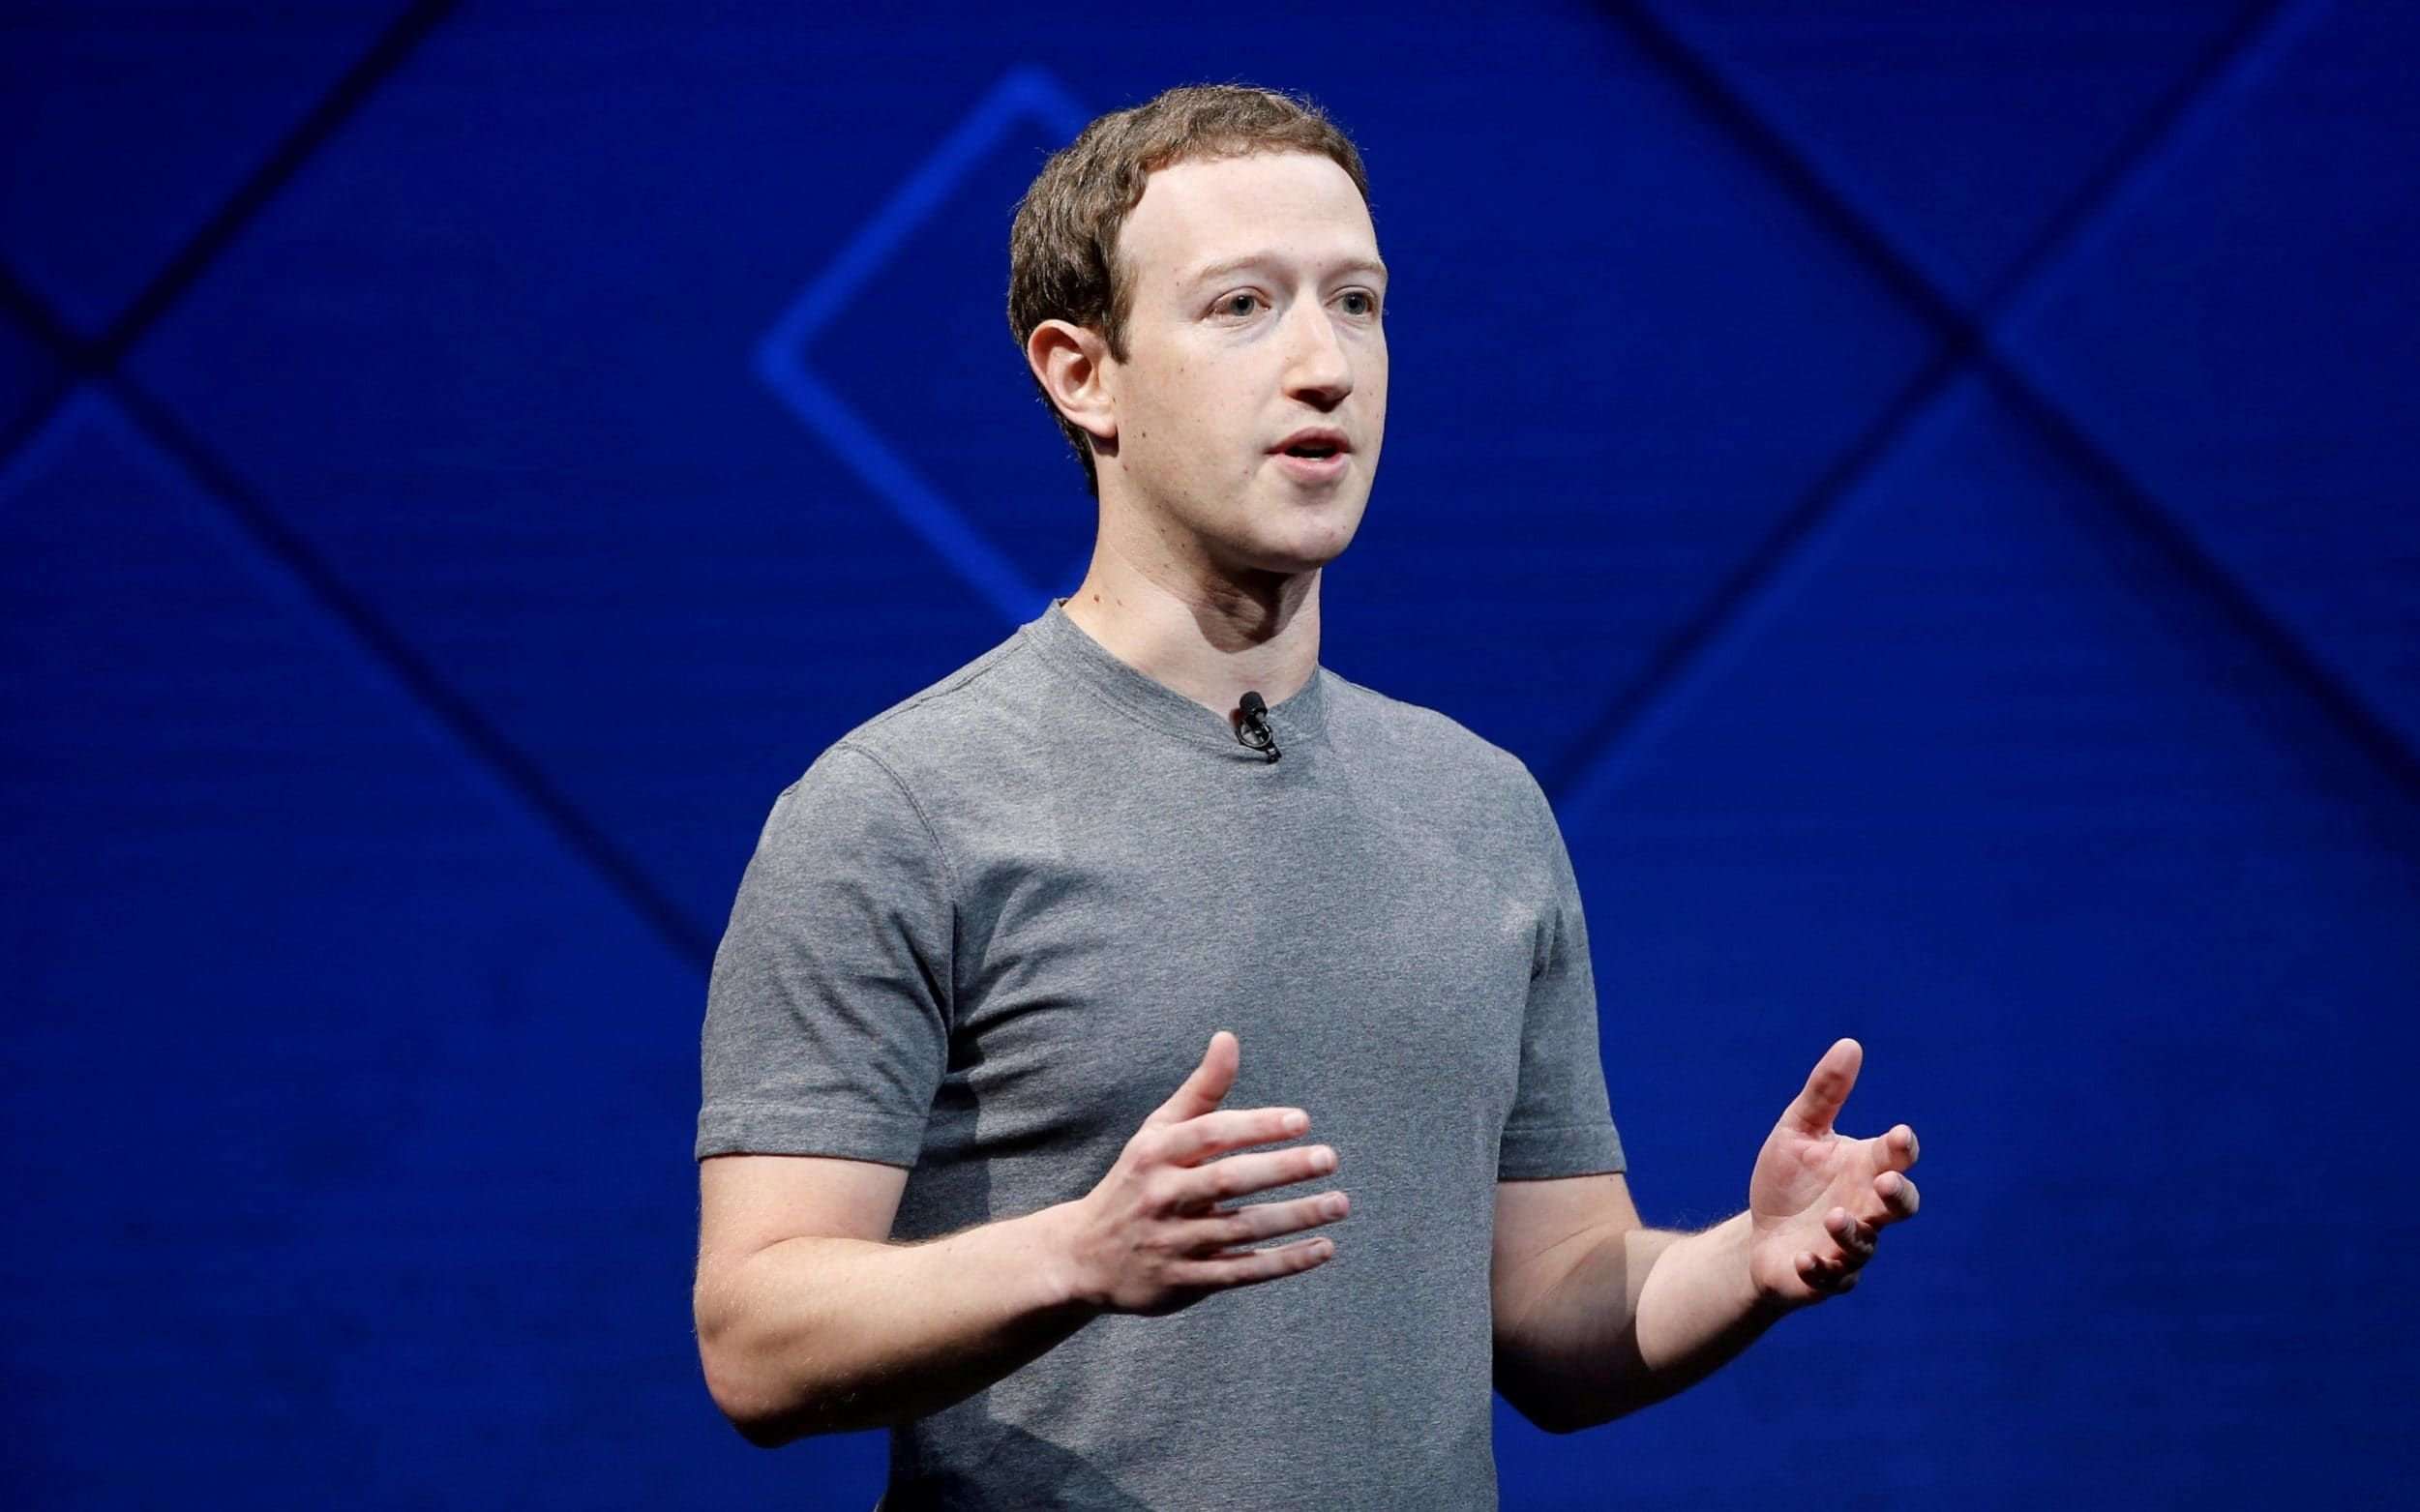 image for Facebook boss Mark Zuckerberg's snub labelled 'absolutely astonishing' by MPs